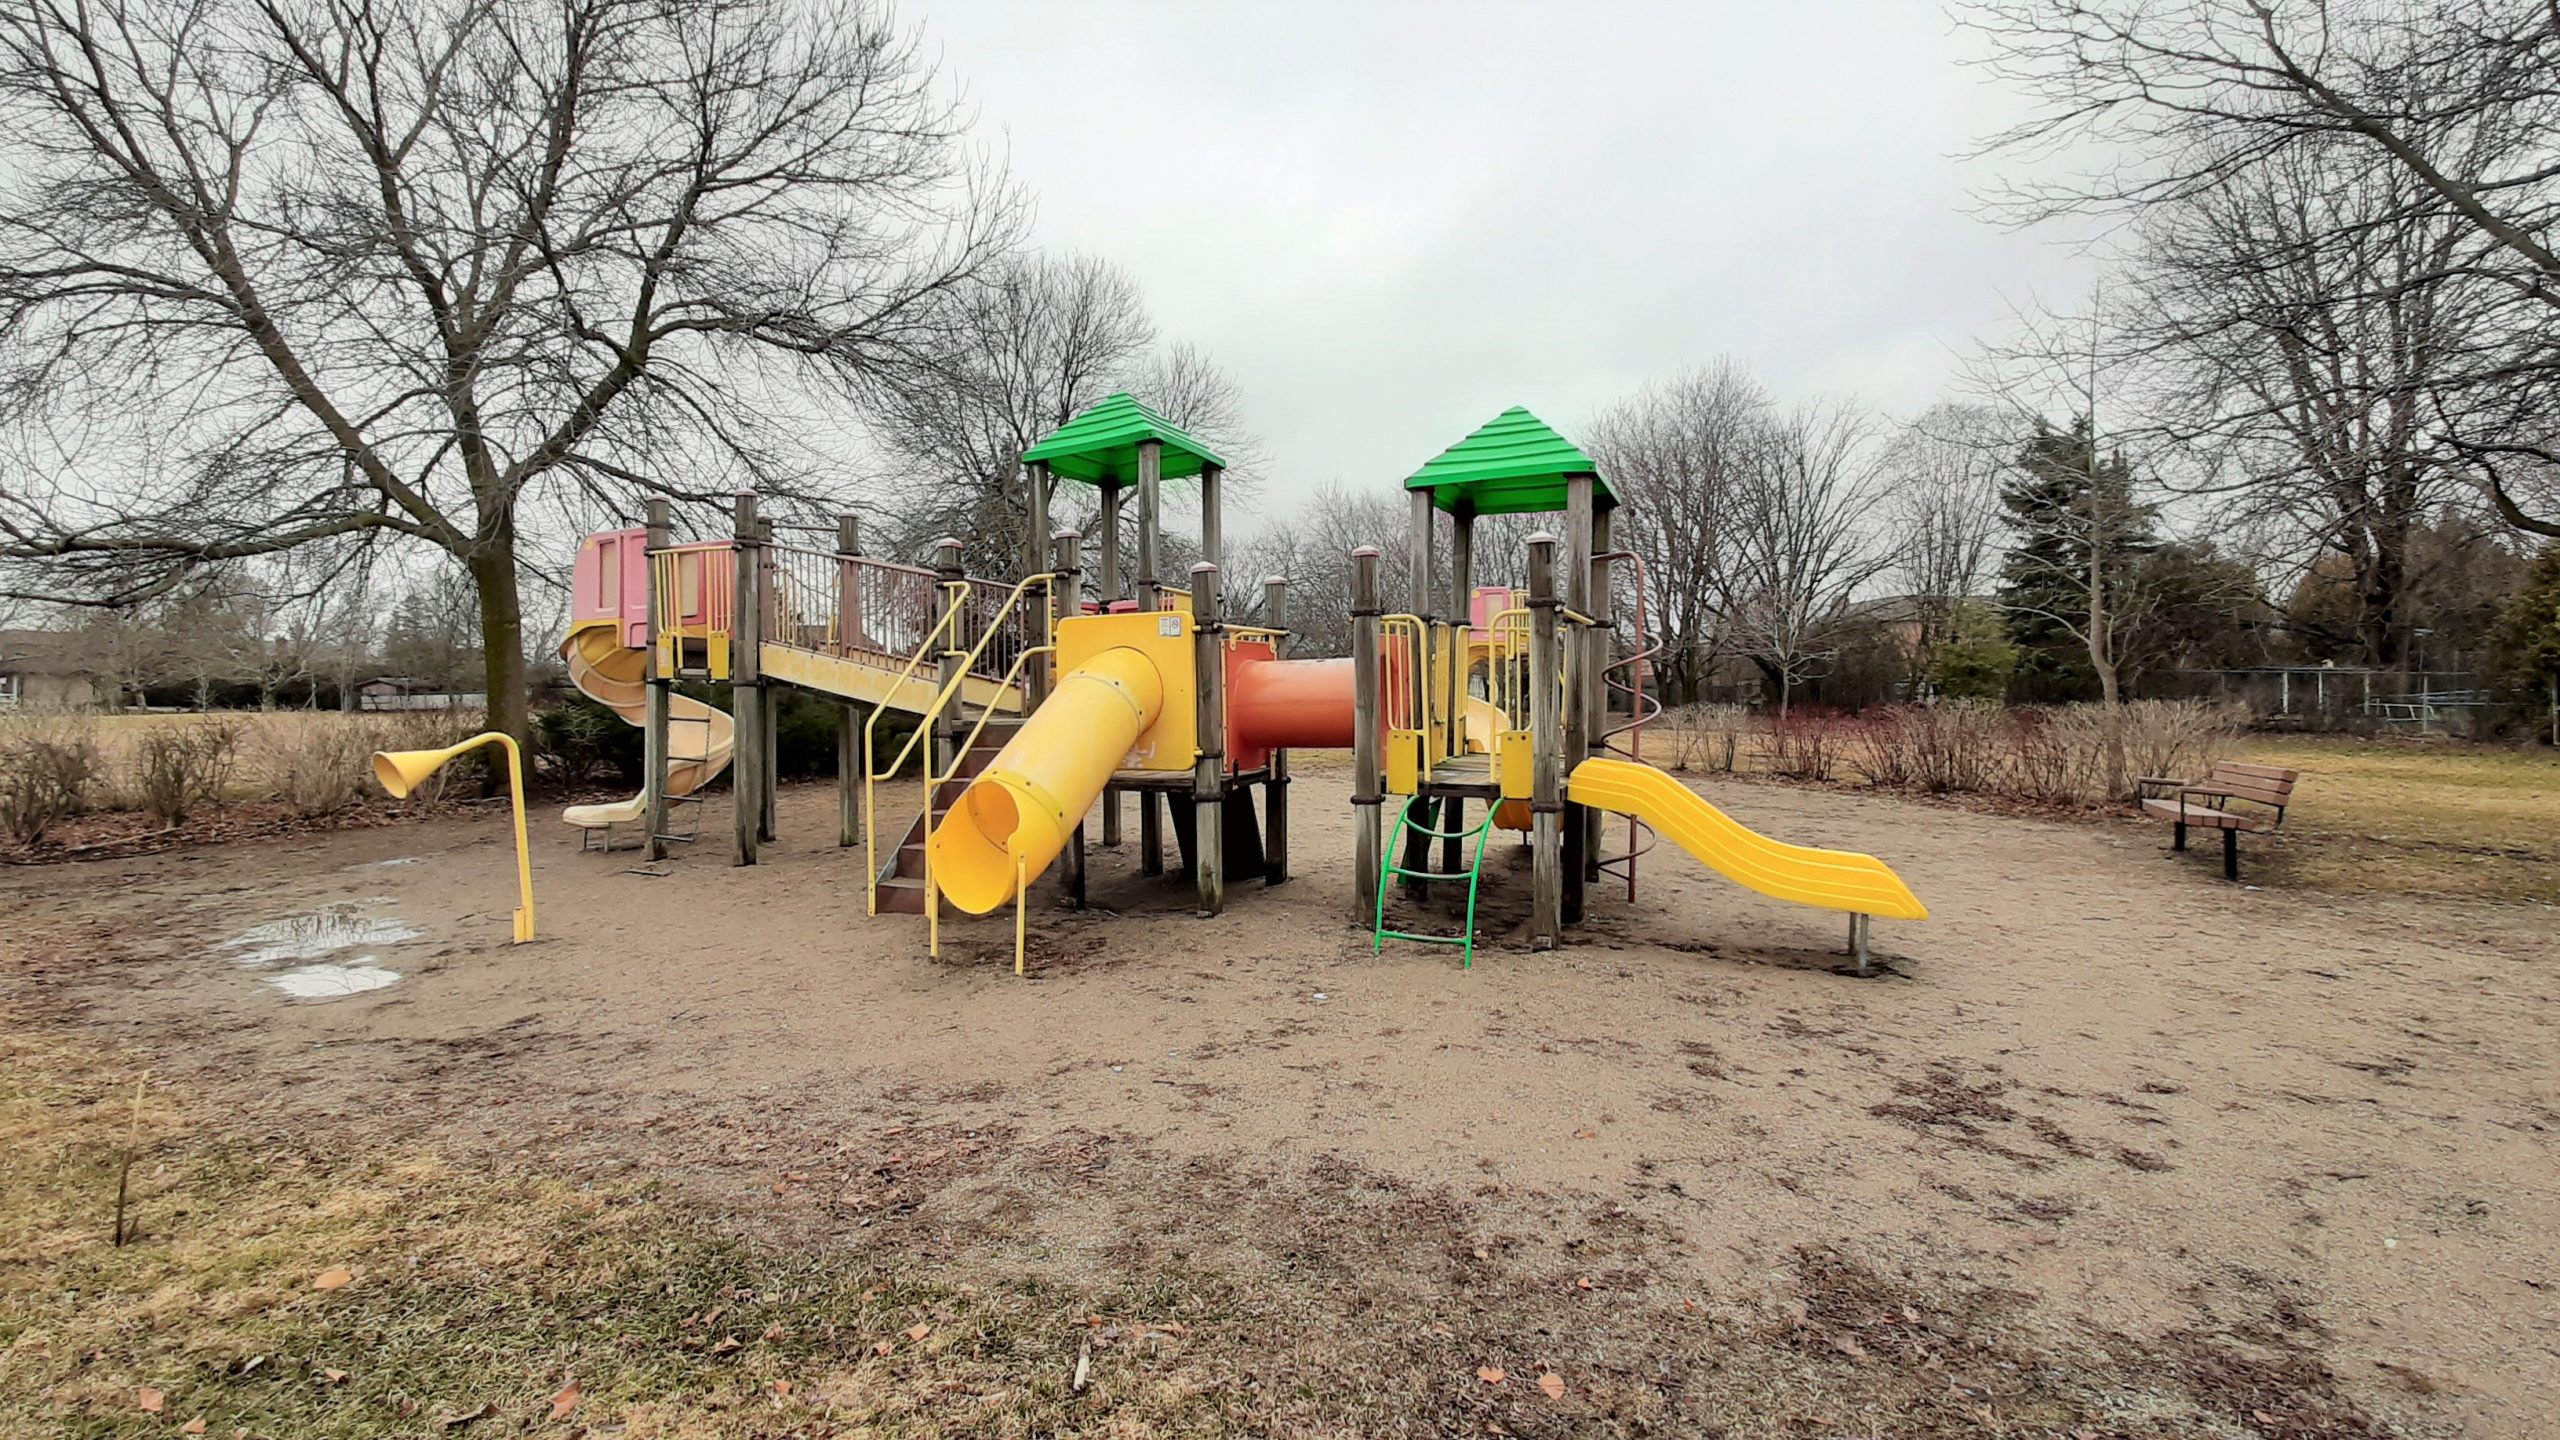 Old wood and plastic playground equipment, including three yellow slides of various sizes, on a sandy play surface.